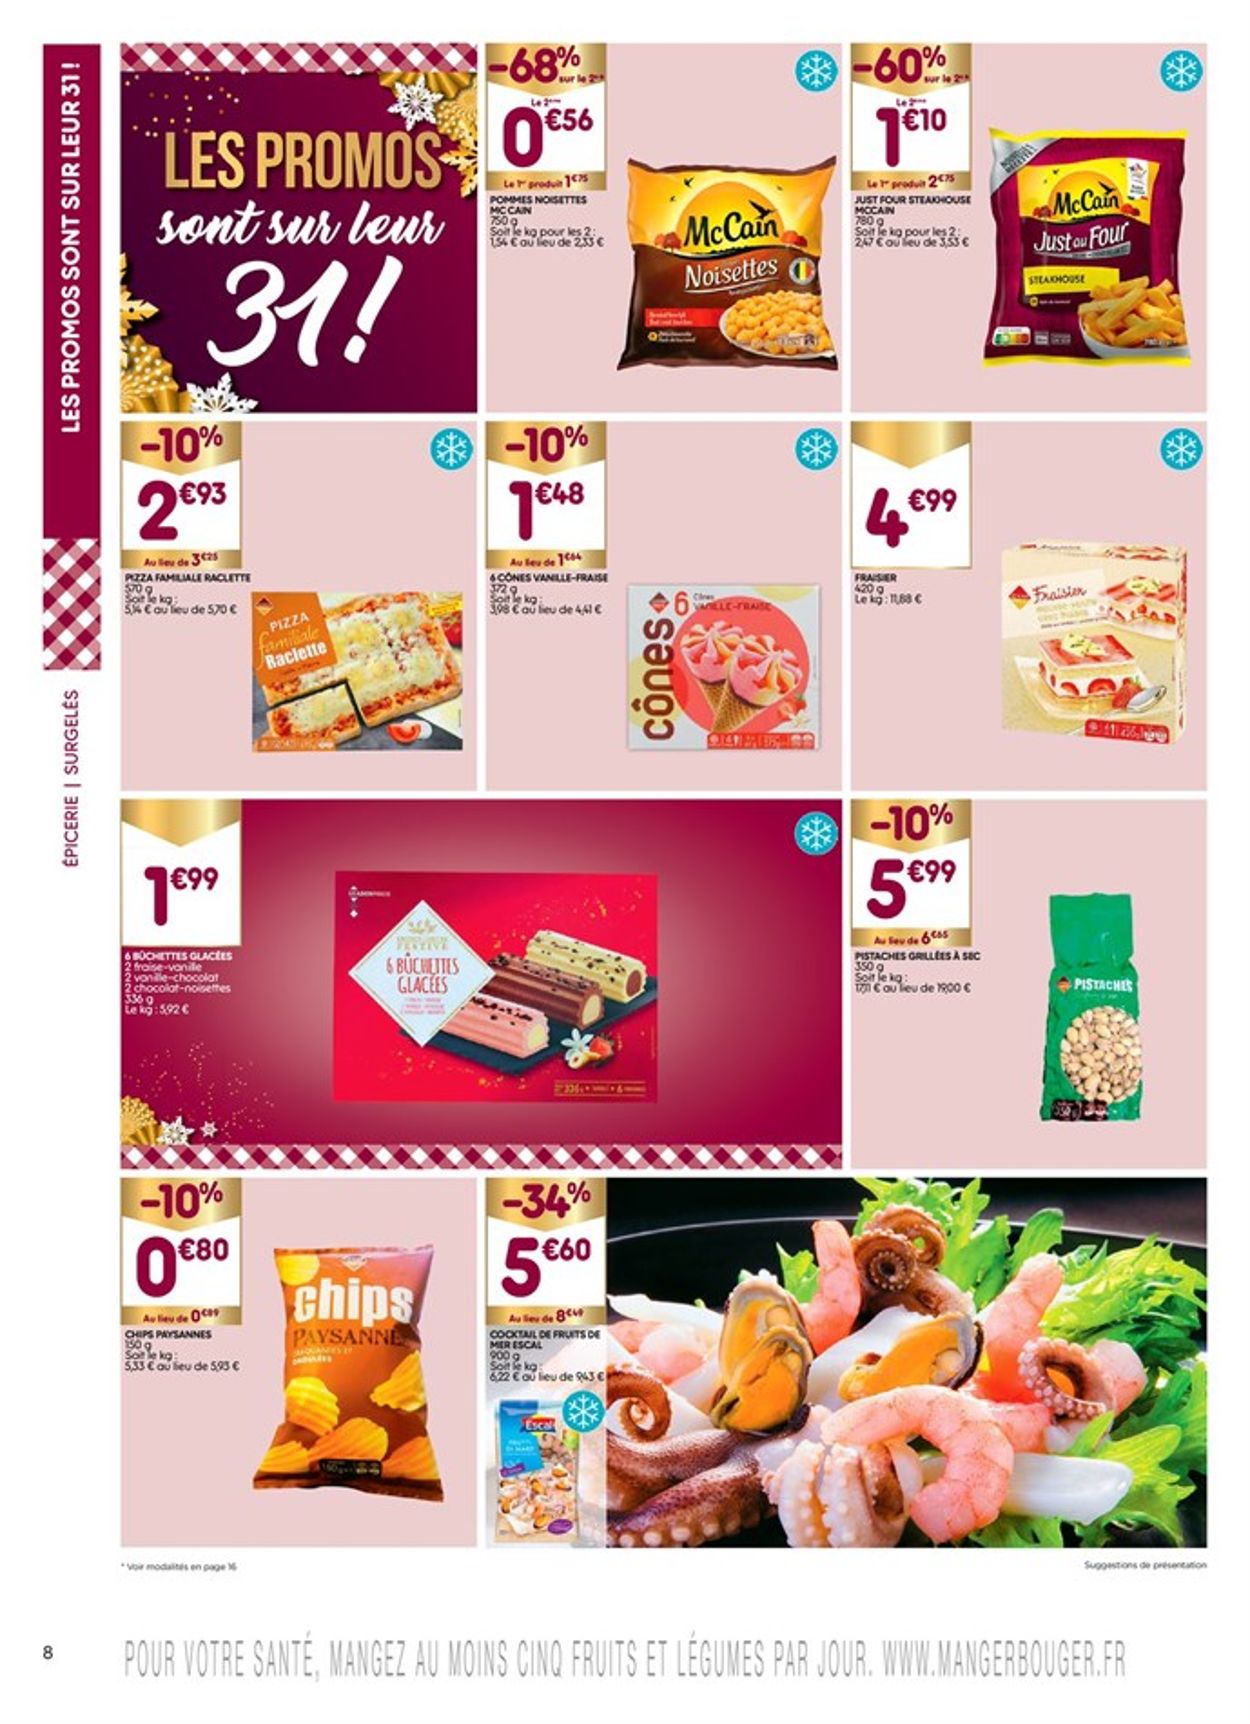 Leader Price Les promos 2020 Catalogue - 21.12-03.01.2021 (Page 8)